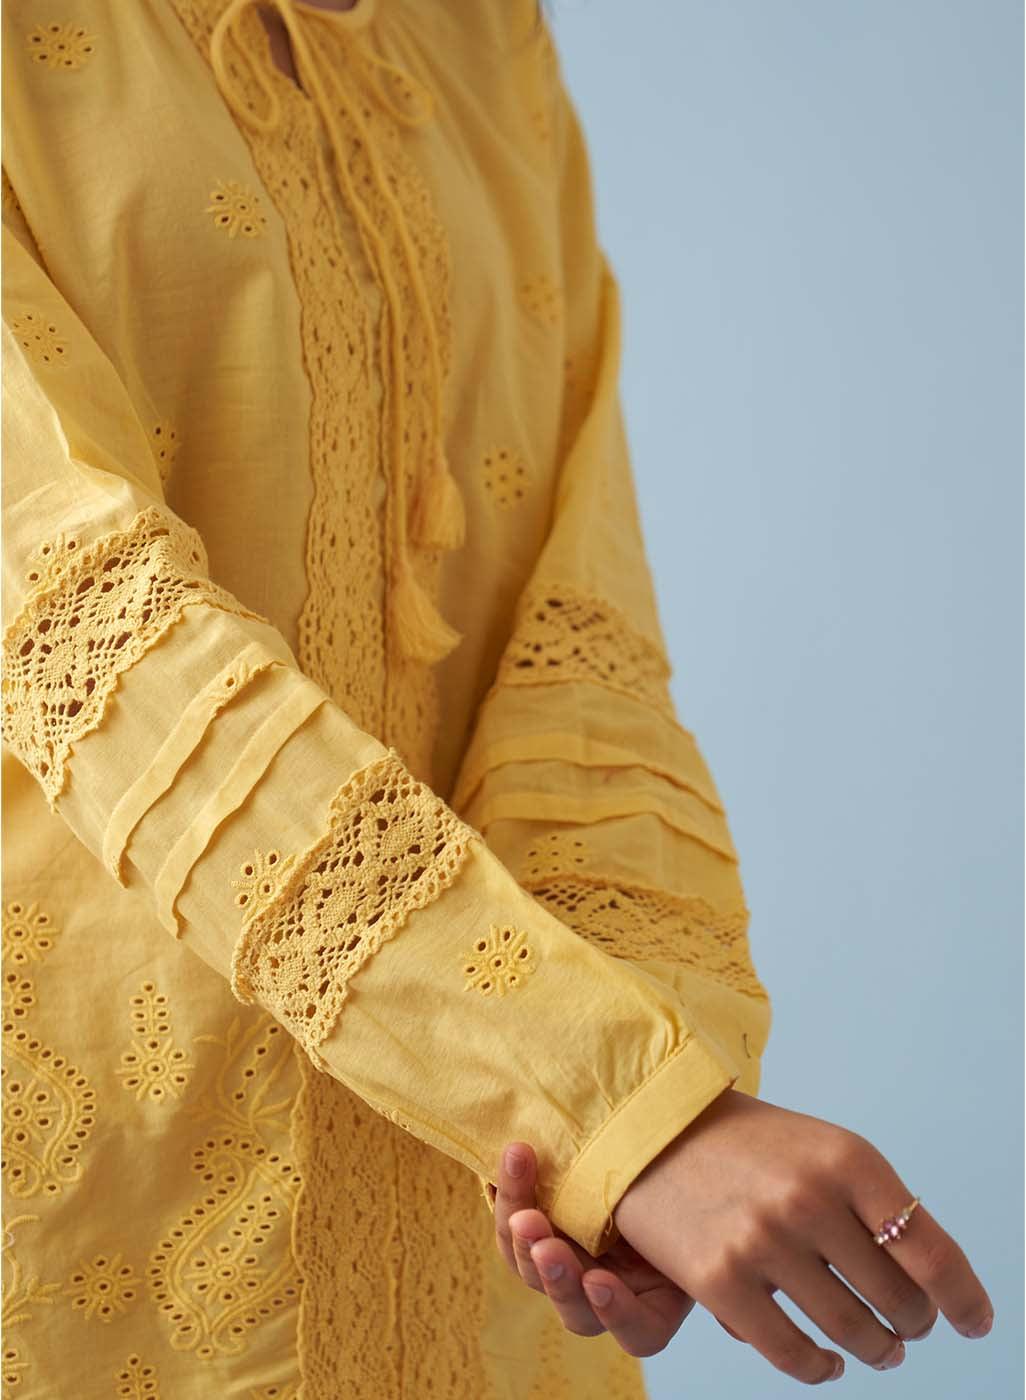 Yellow Schiffli Embroidered Top with Lace Insert - Lakshita